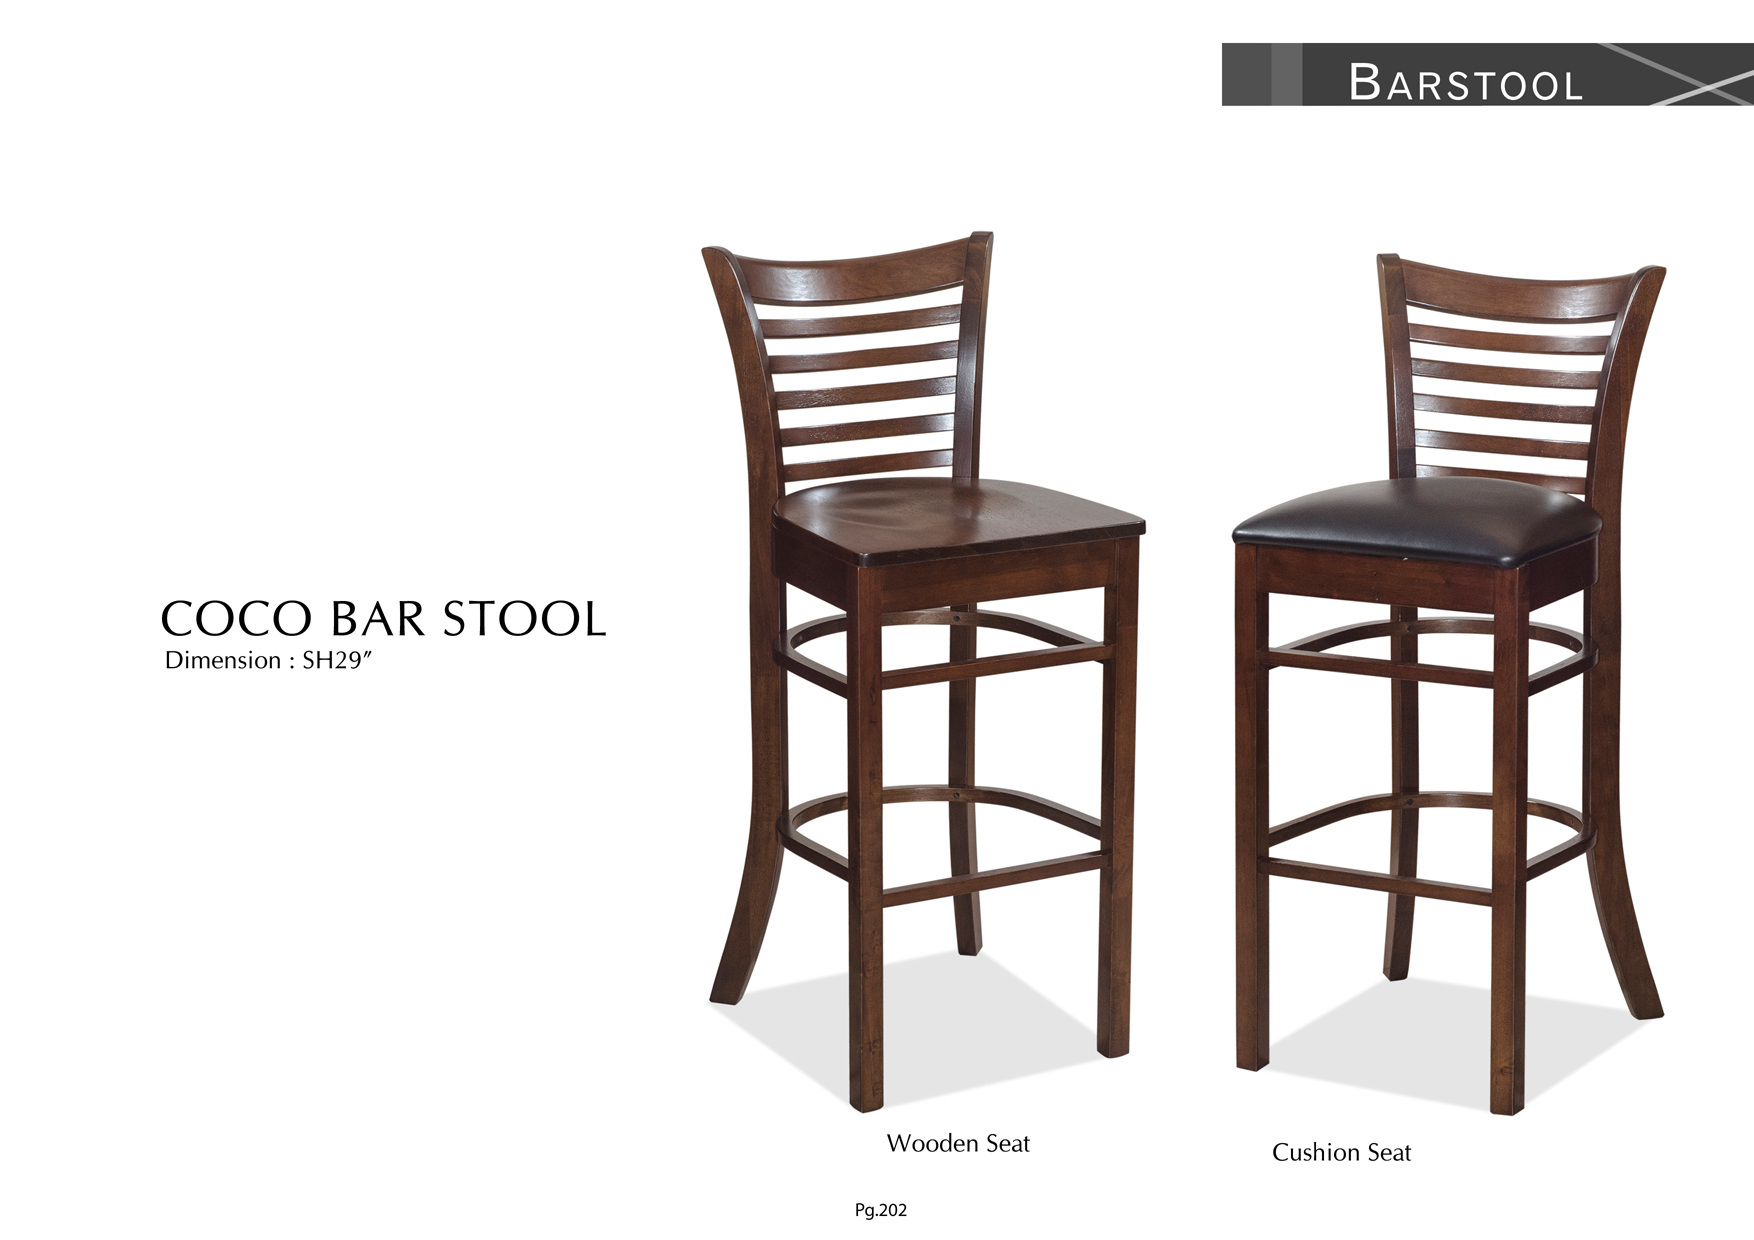 Product: PG202. COCO BAR STOOL